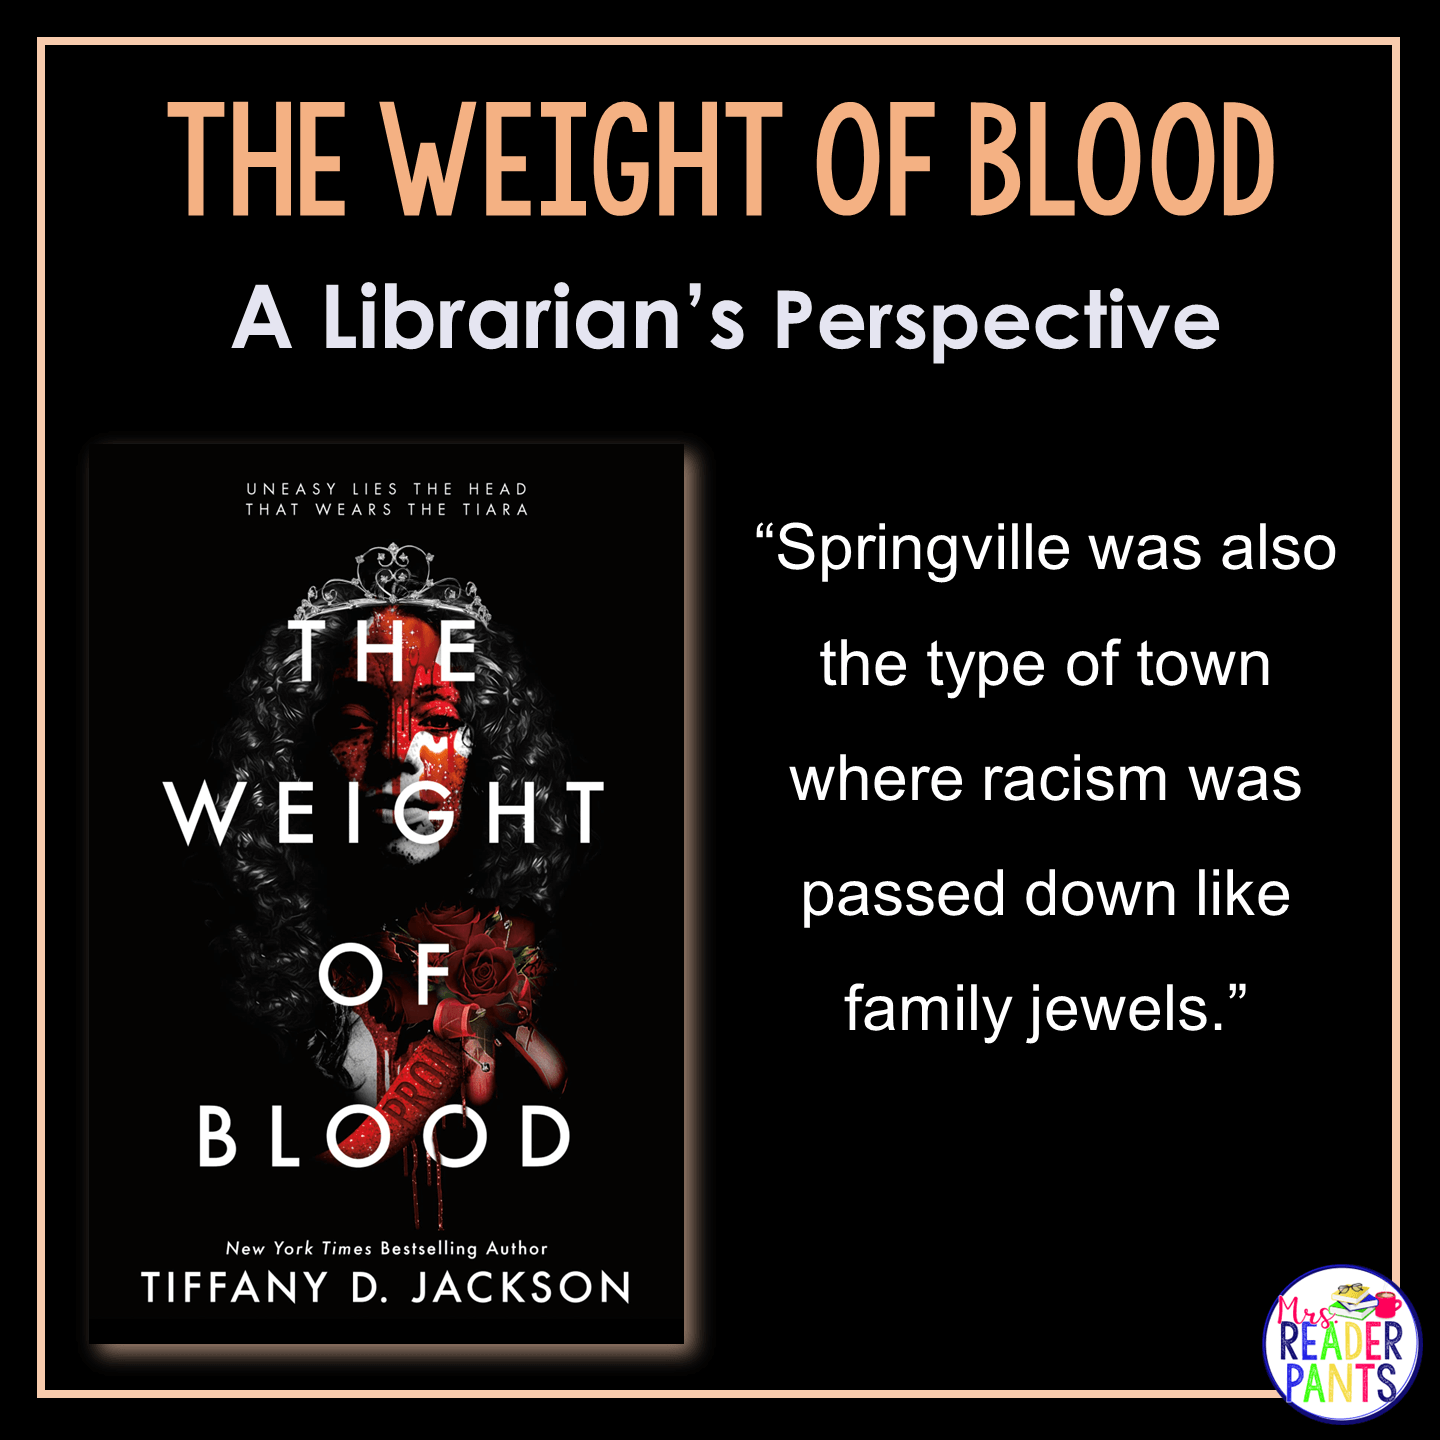 This is a librarian's perspective review of The Weight of Blood by Tiffany D. Jackson.